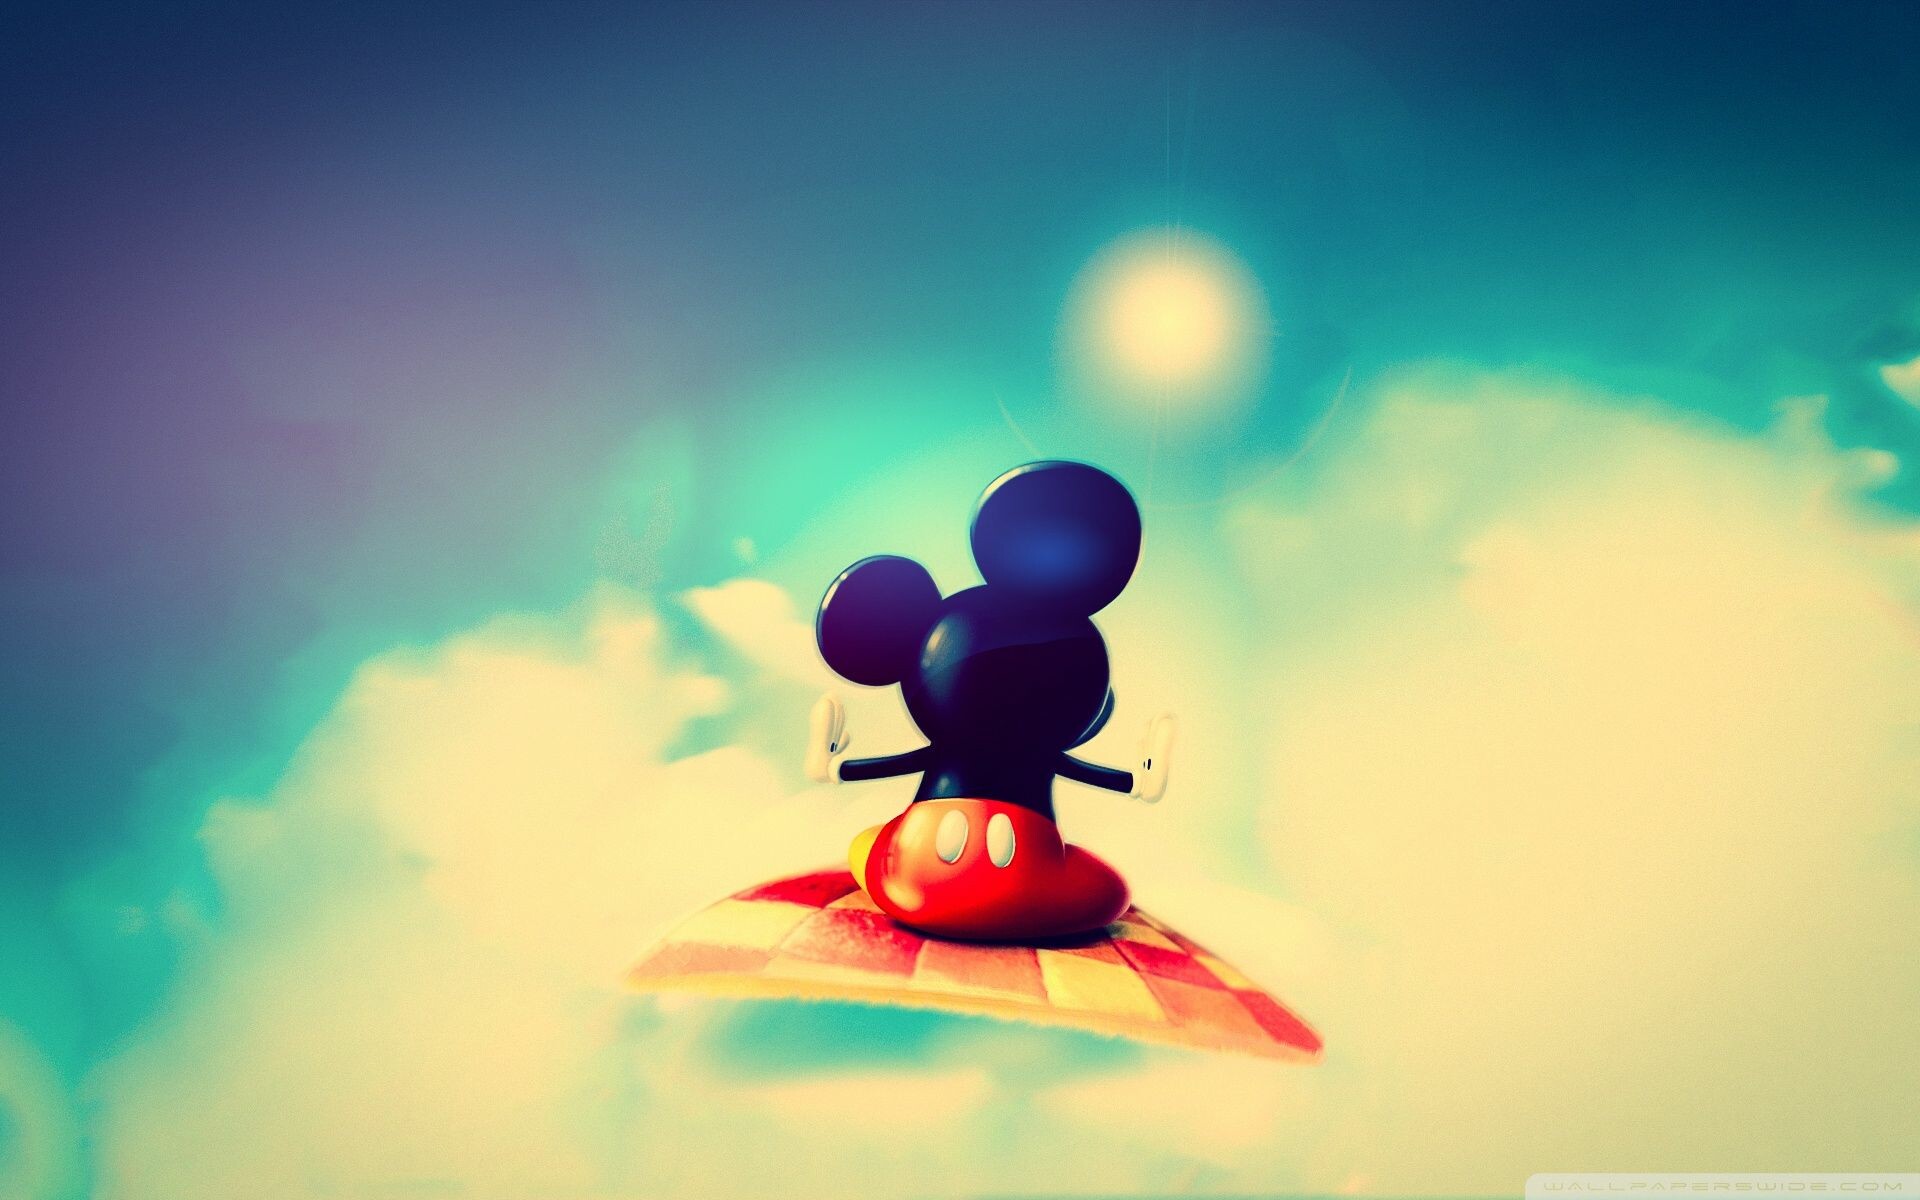 Disney Desktop Wallpaper: HD, 4K, 5K for PC and Mobile. Download free image for iPhone, Android